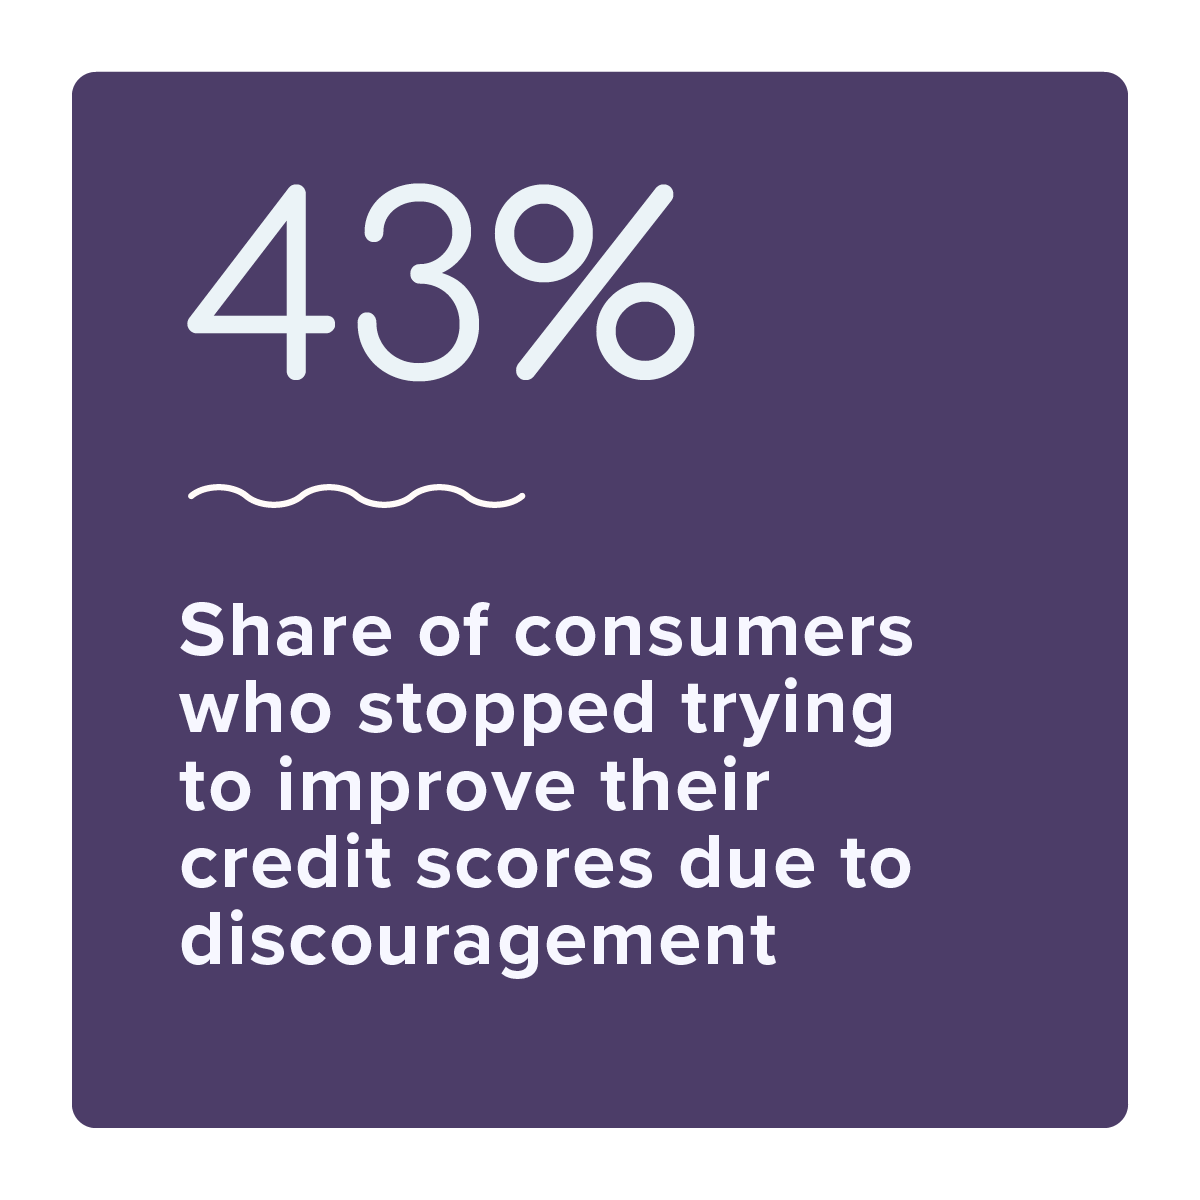 43%: Share of consumers who stopped trying to improve their credit scores due to discouragement